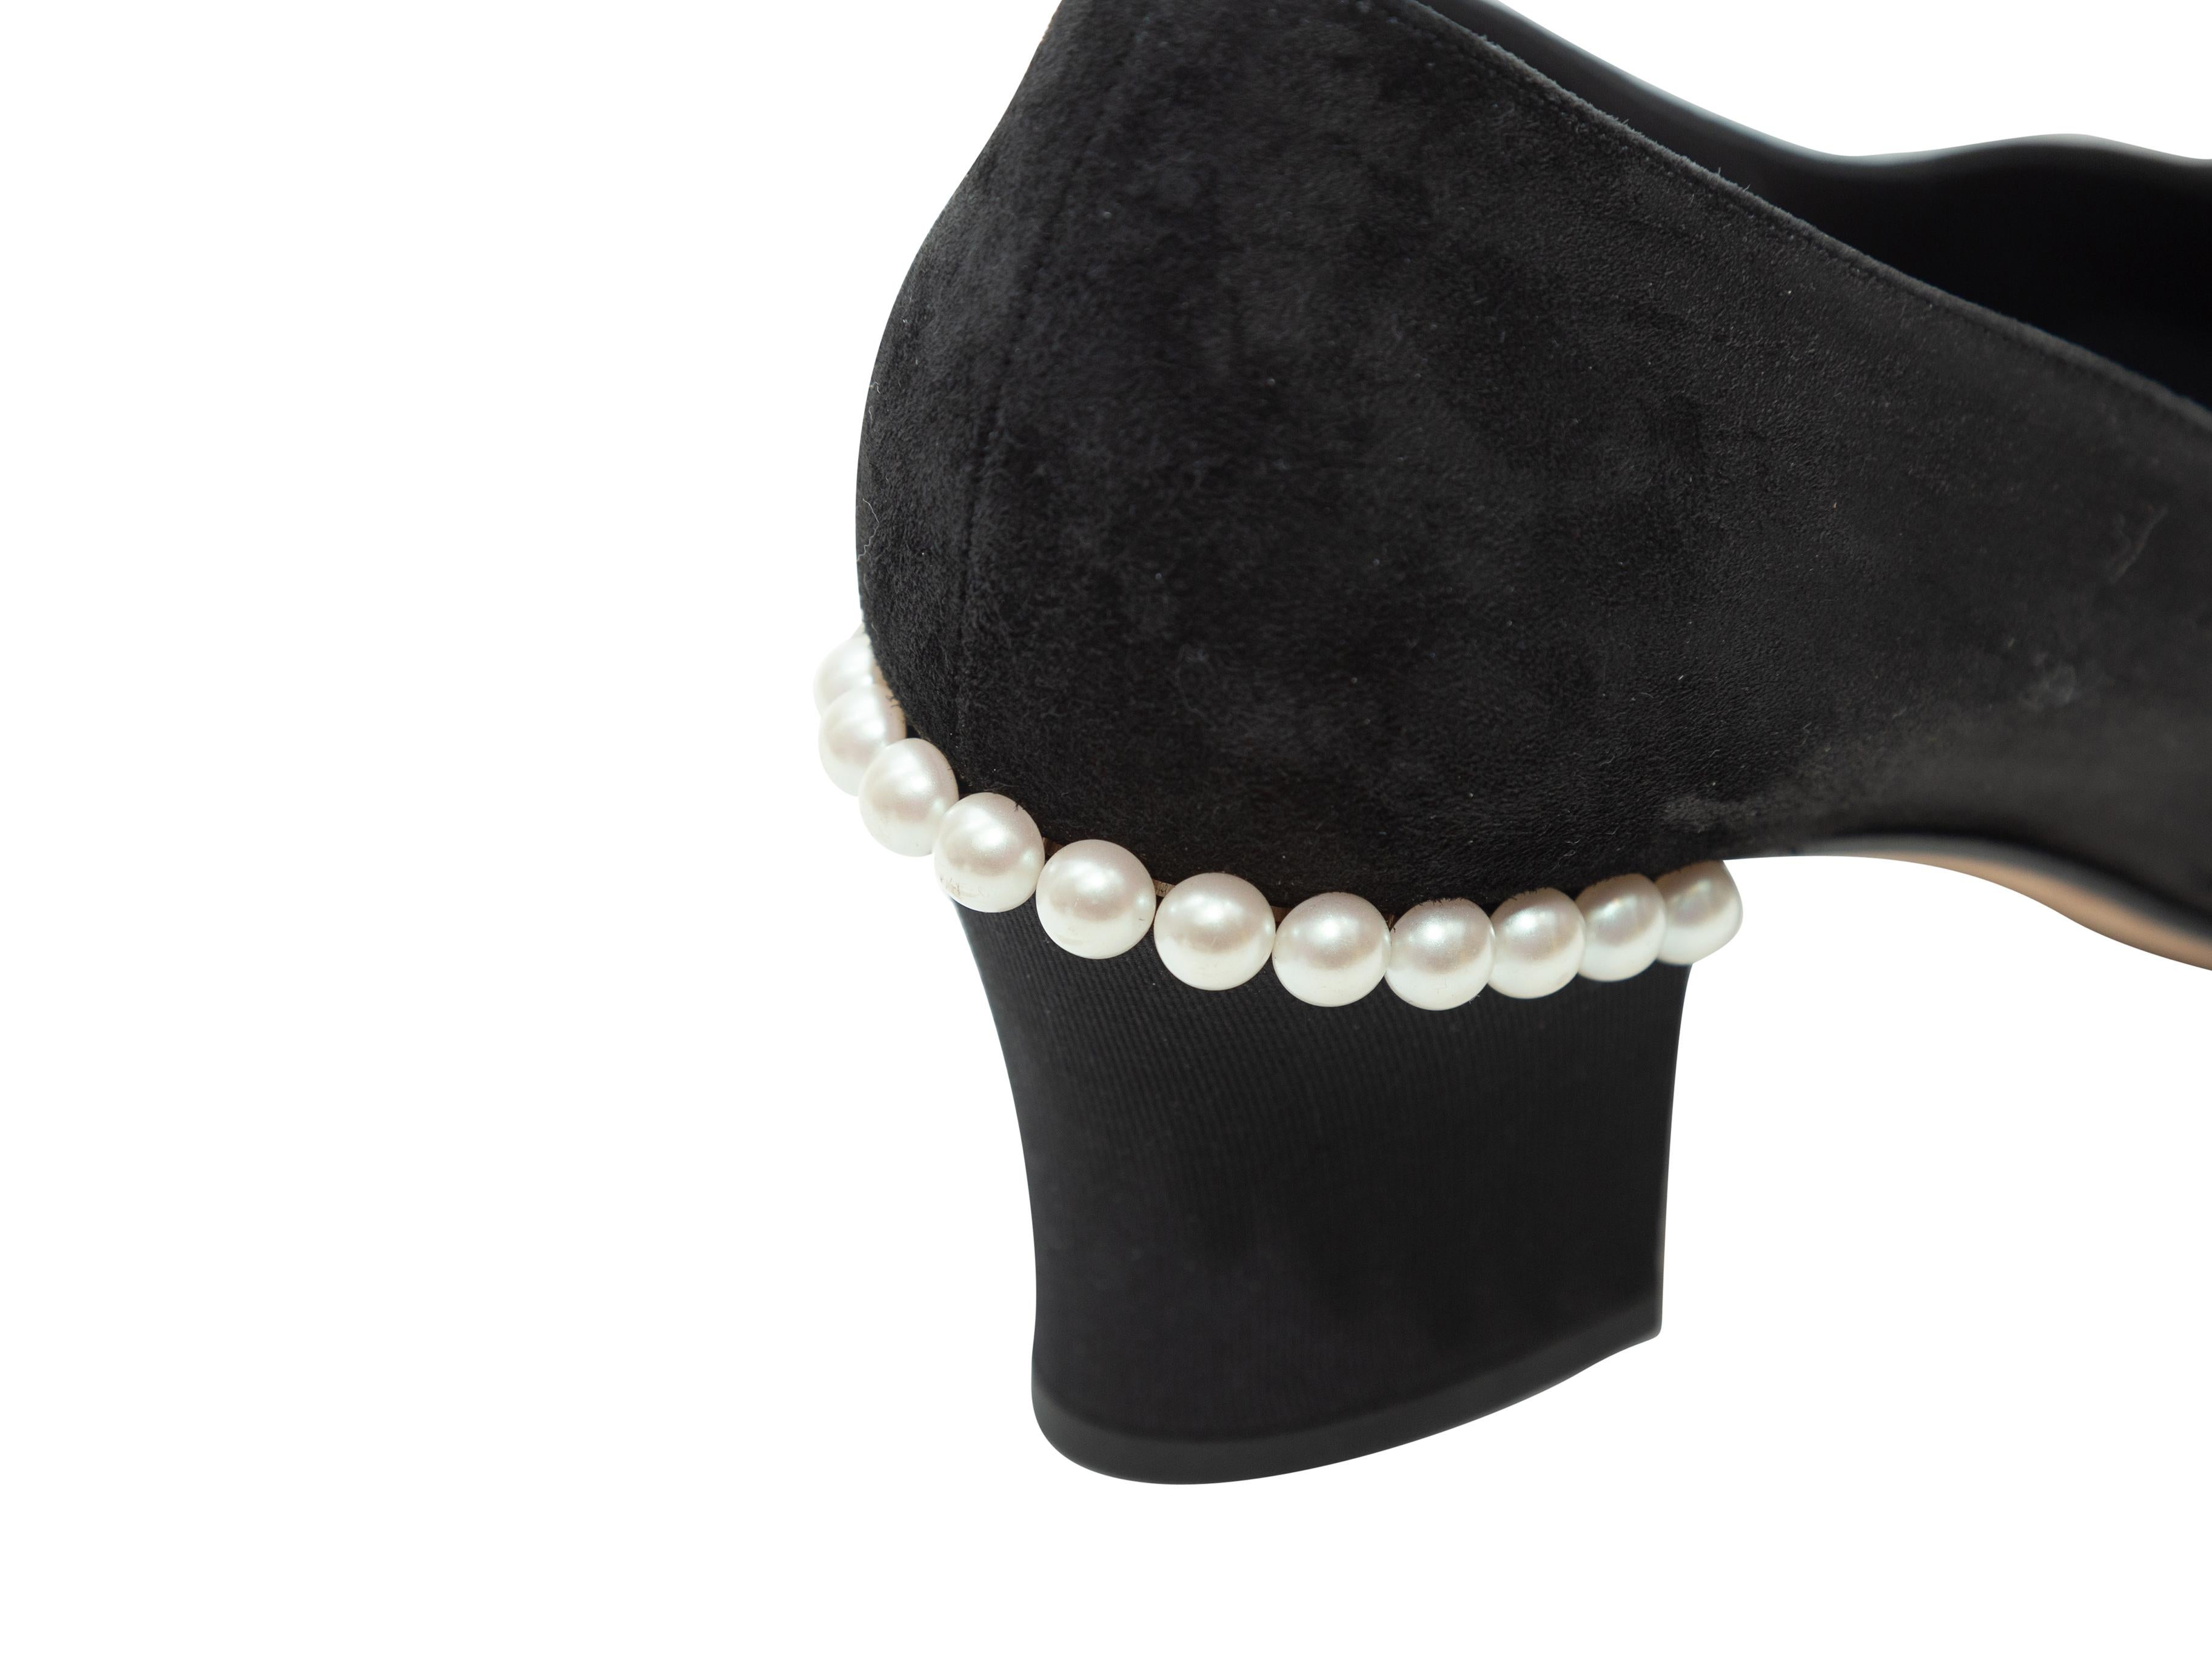 Women's Chanel Black Suede Faux Pearl-Accented Heels